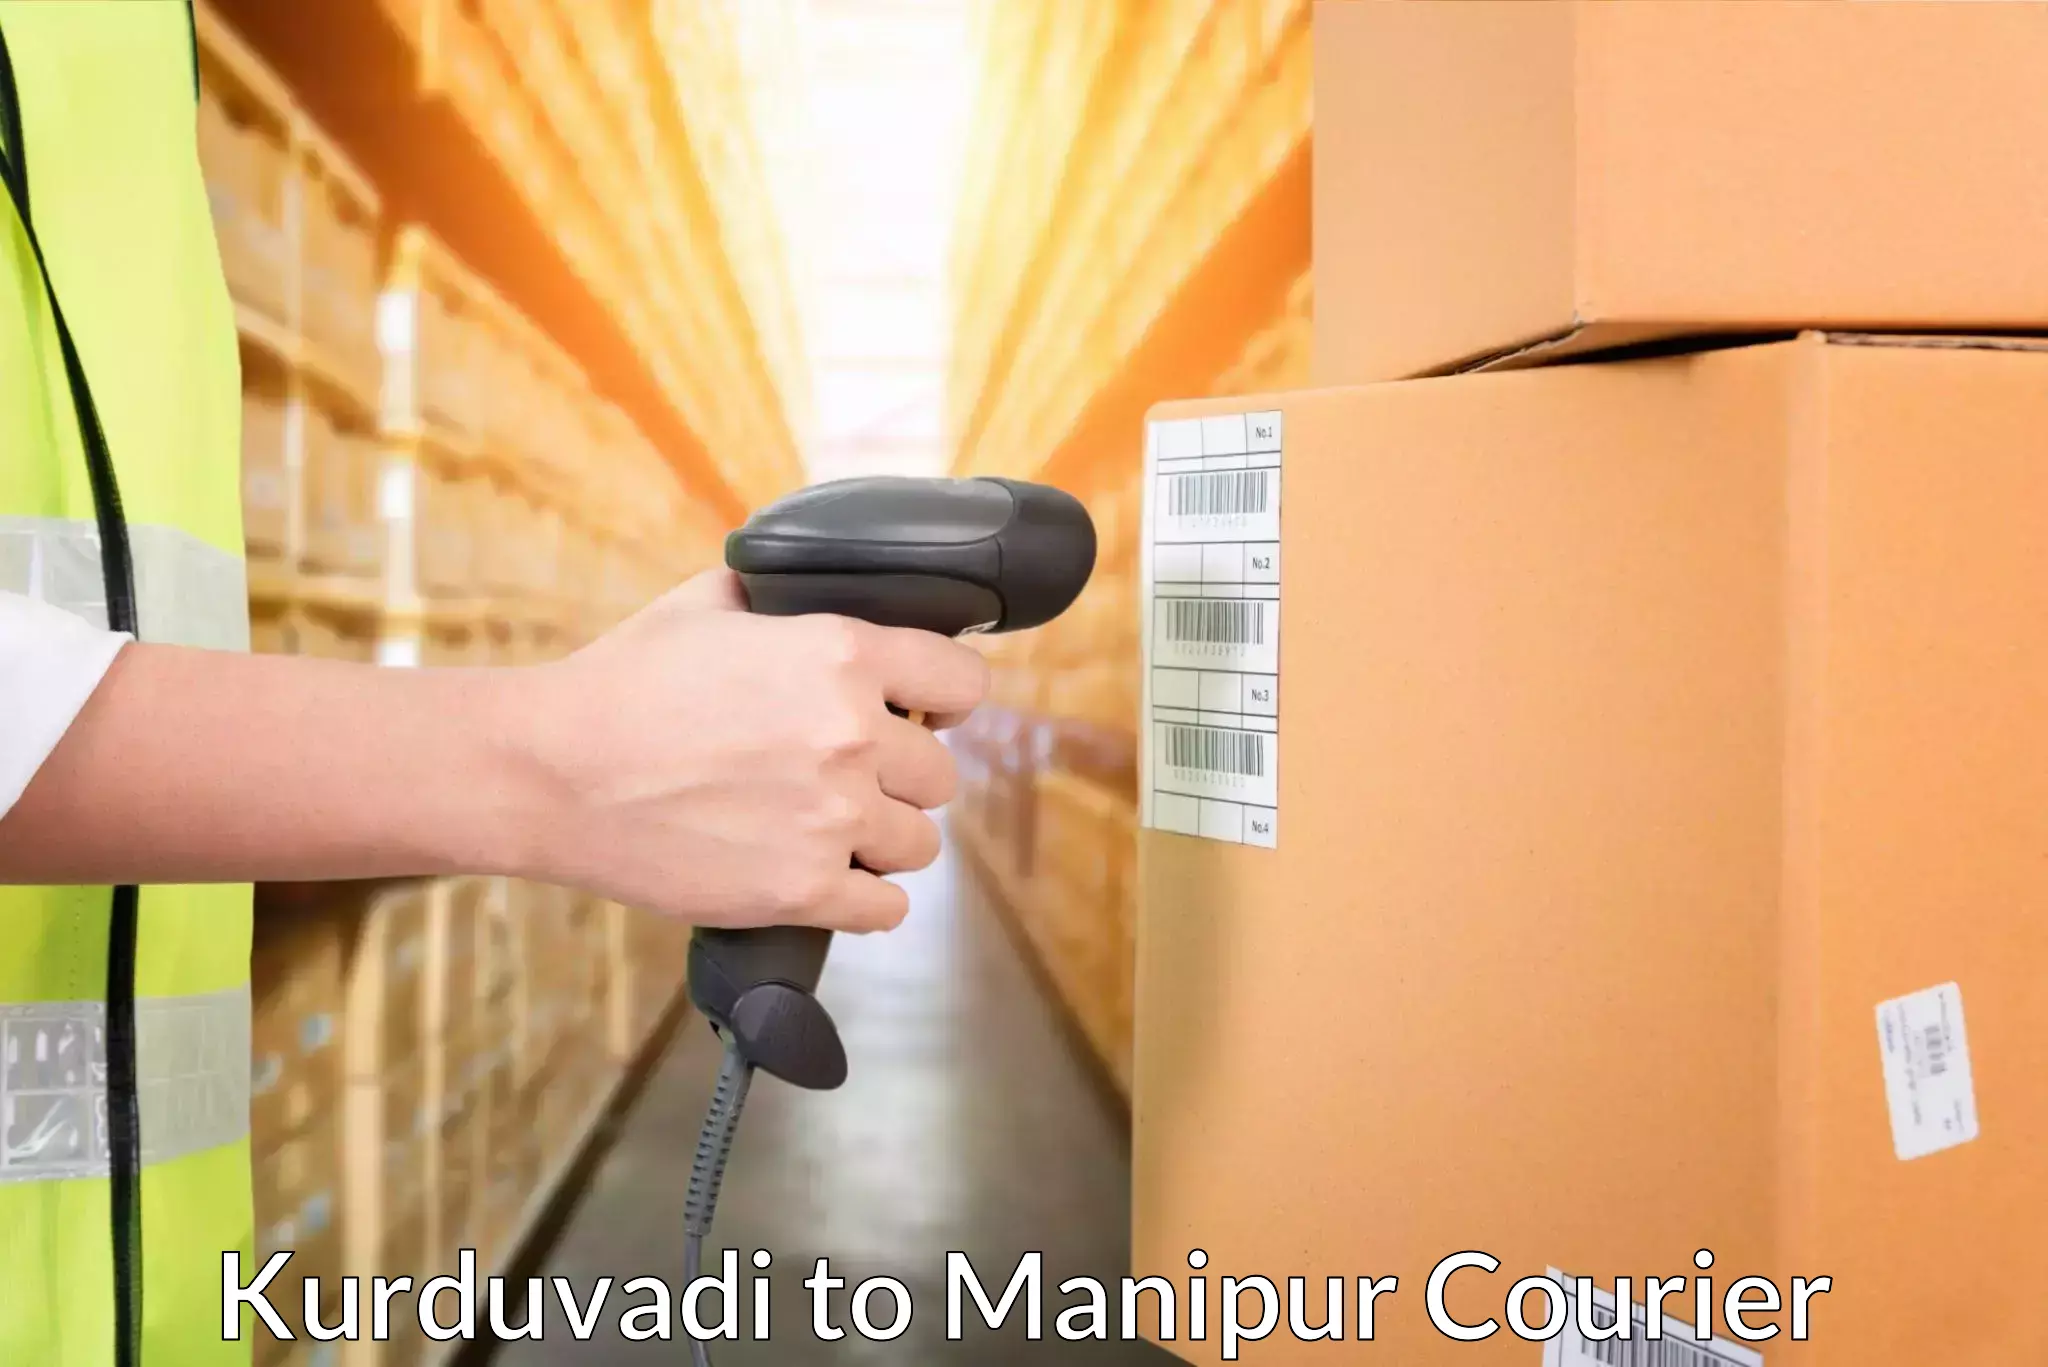 State-of-the-art courier technology Kurduvadi to Imphal